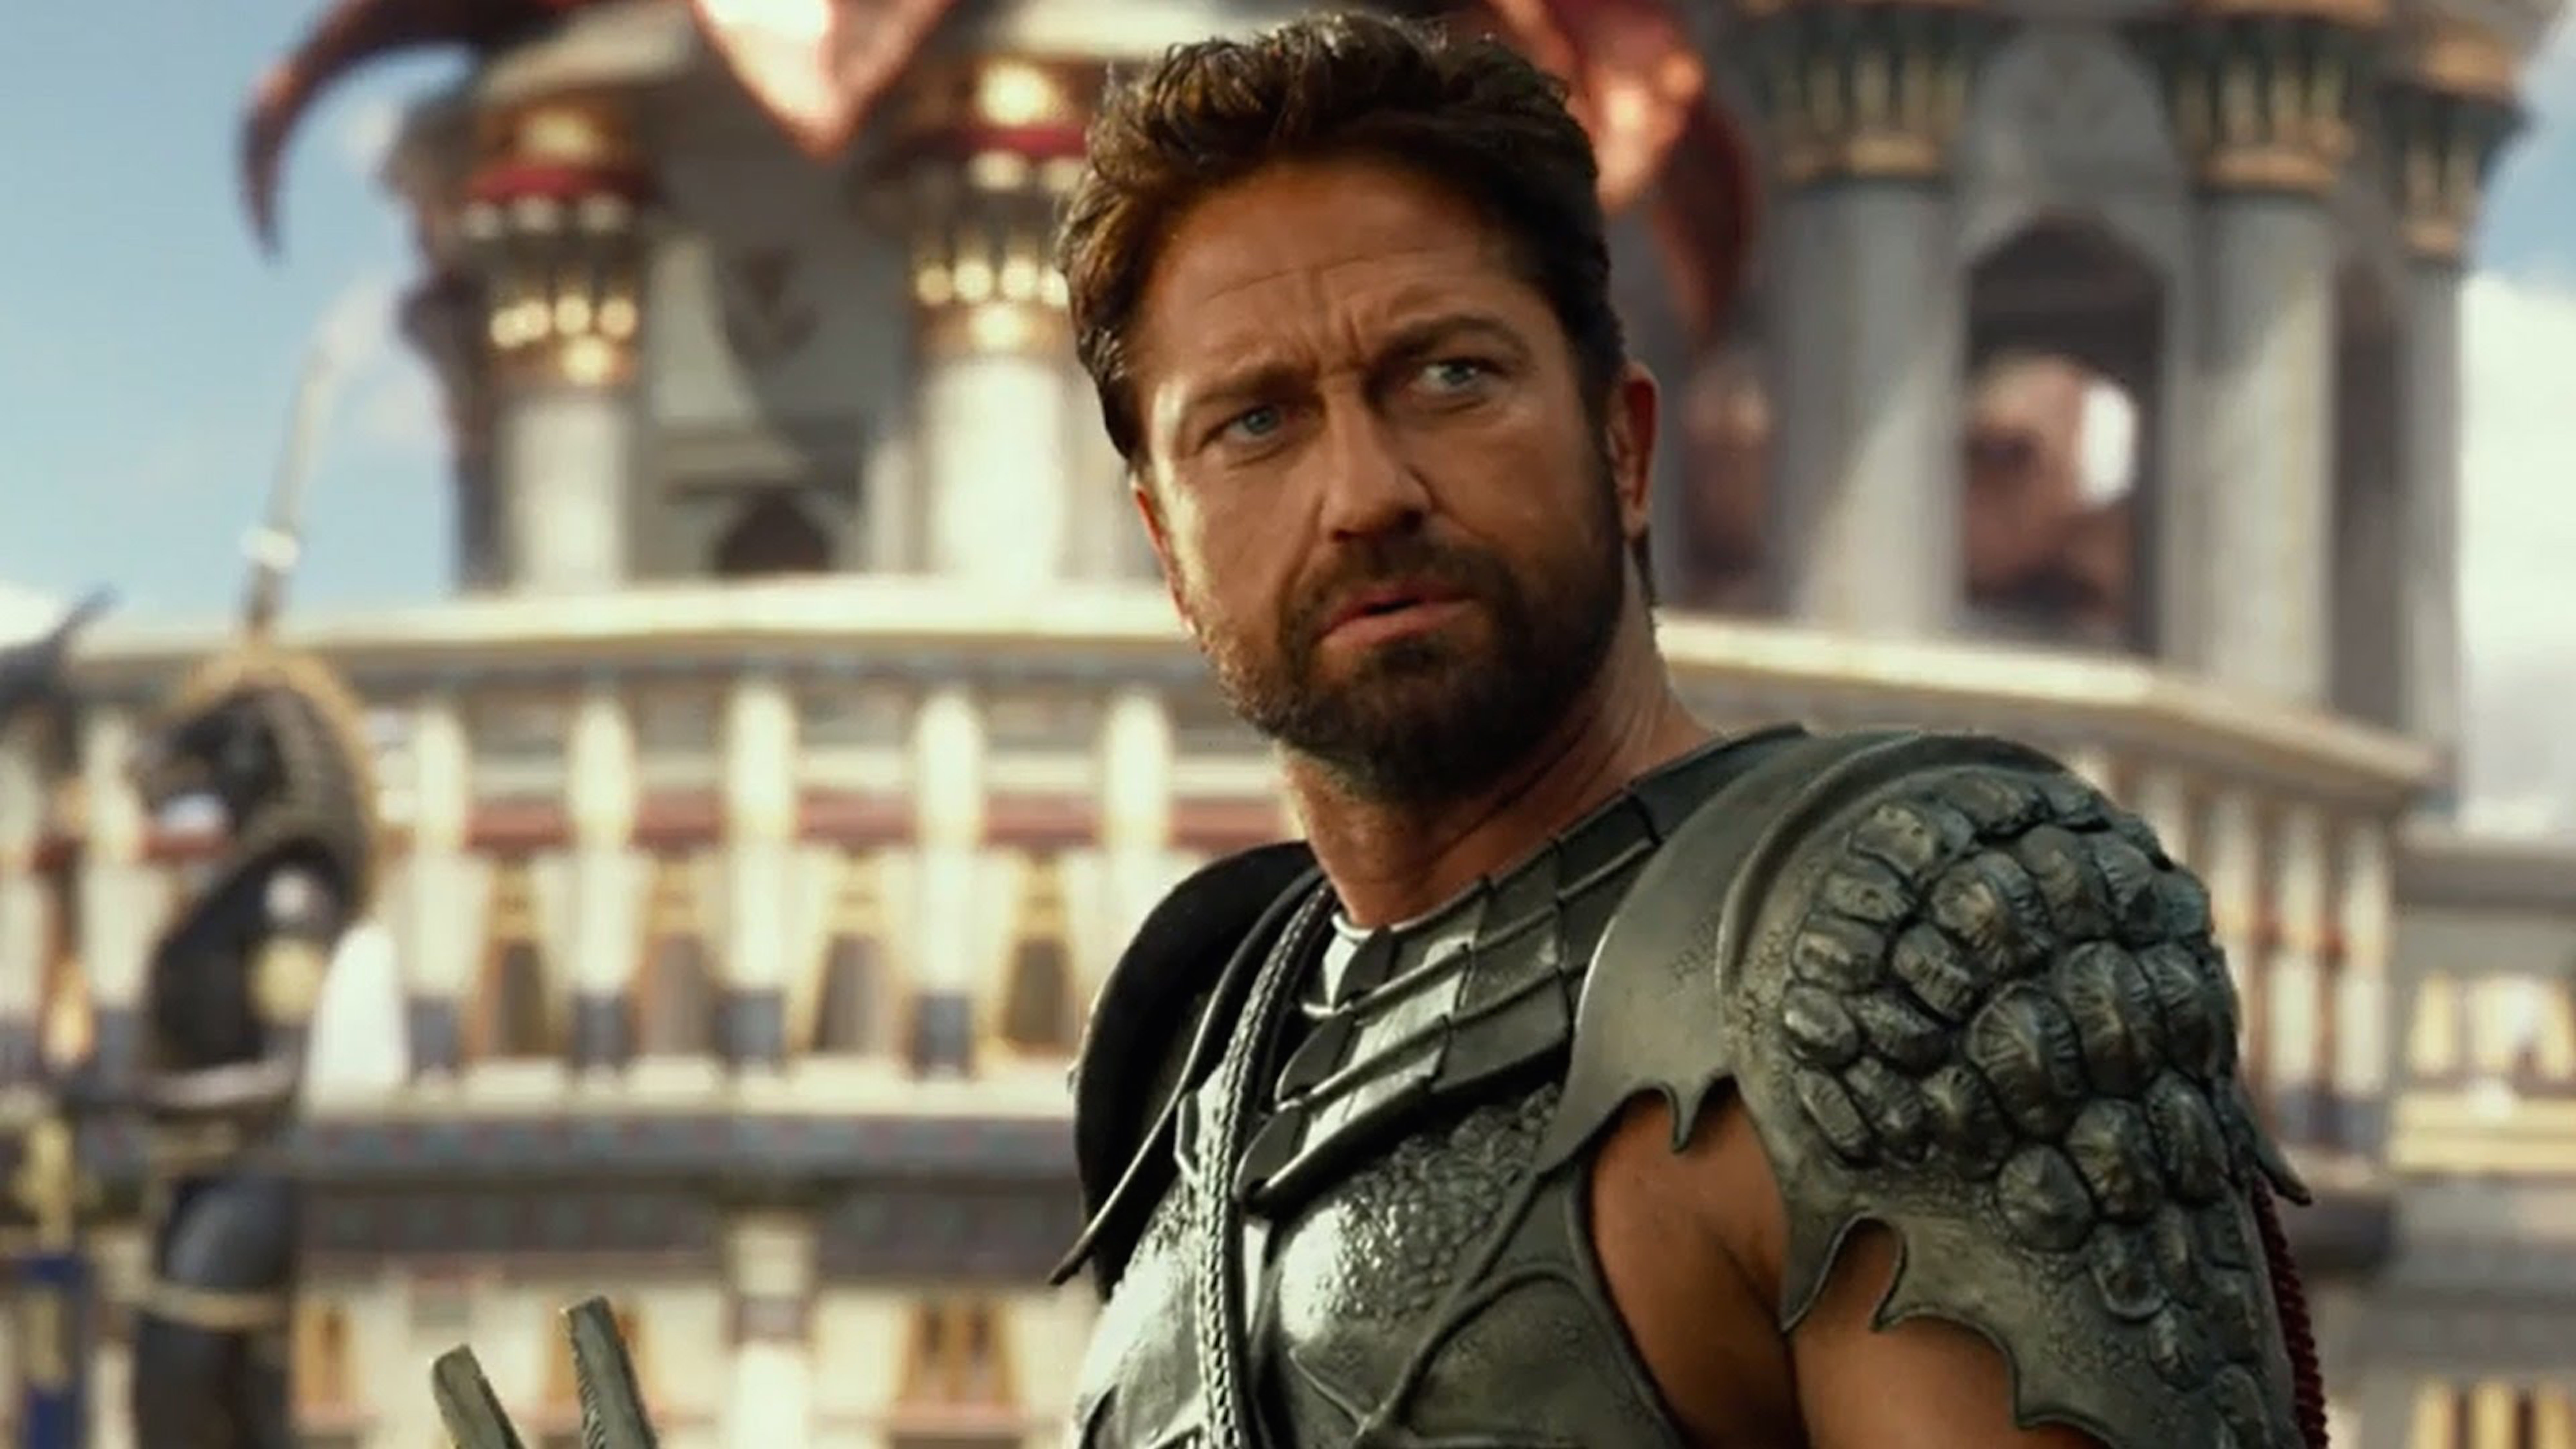 ‘Gods of Egypt’ Should Be Buried In The Sand